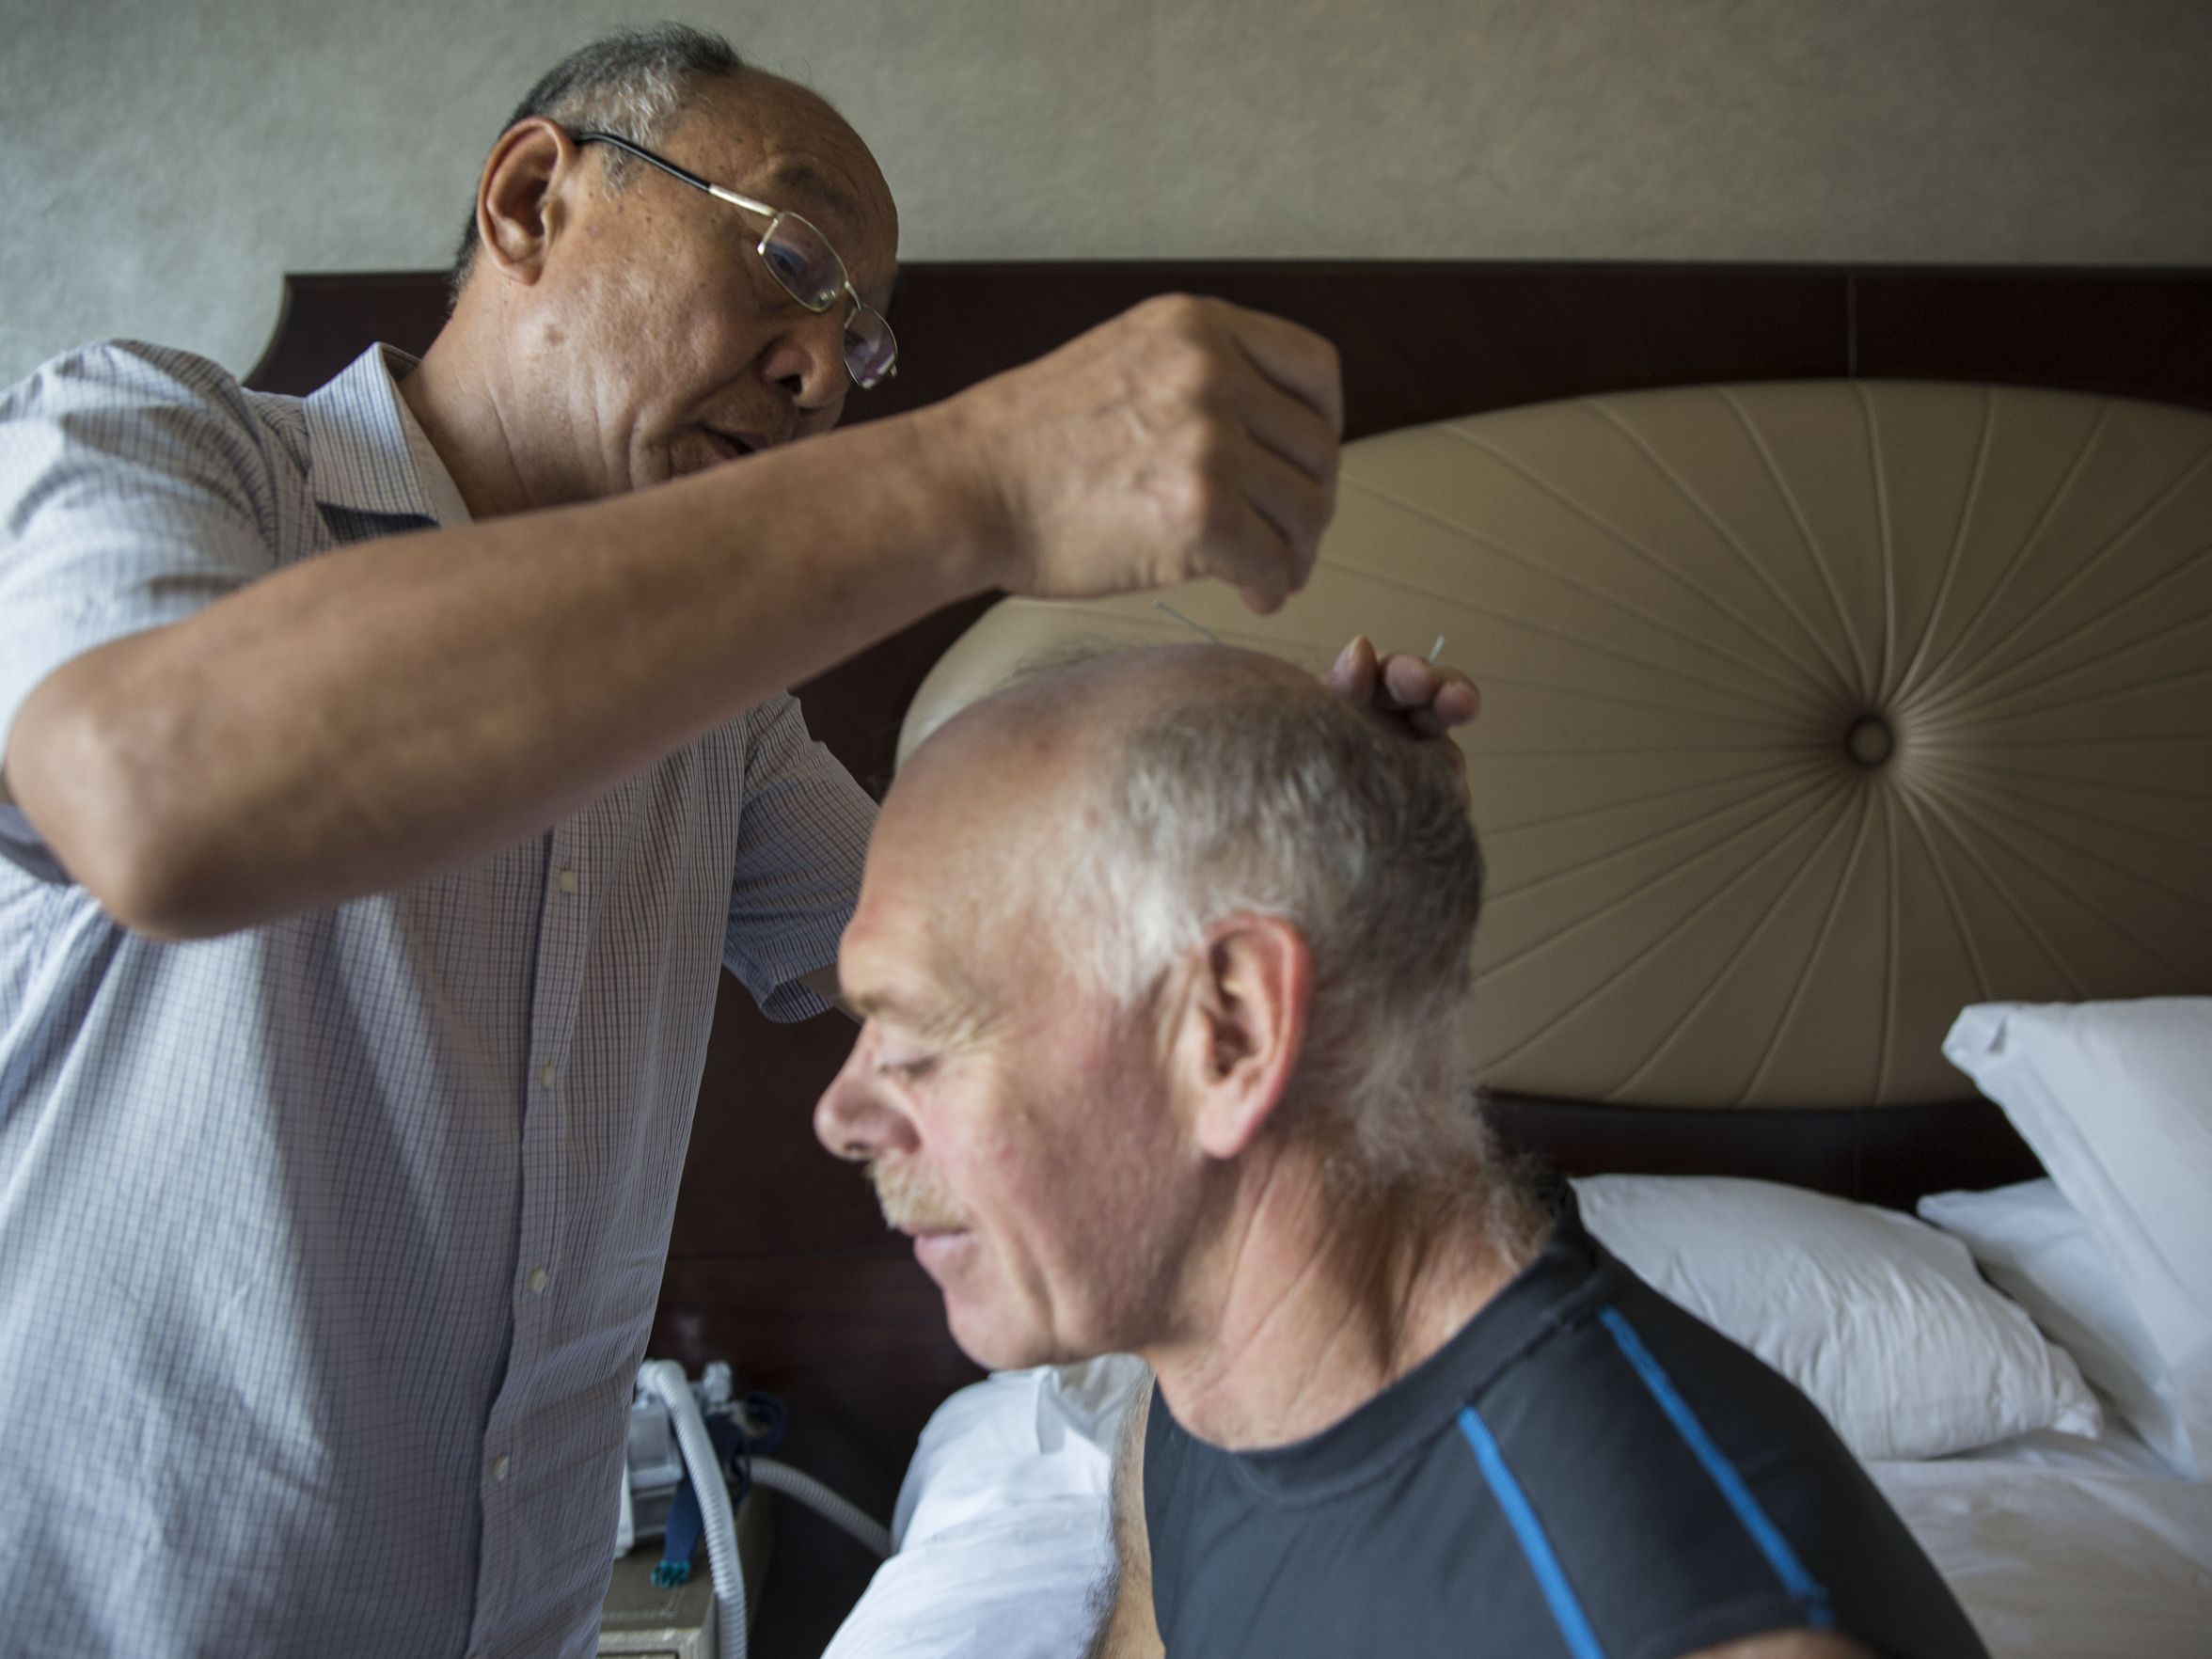 Jim Detweiler, of Williamsburg, Iowa, receives an acupuncture treatment from Dr. Zhang Shulin on Wednesday, Sept. 20, 2017, at the St. Regis hotel in Tianjin, China. Detweiler came to China to use traditional medicine as a treatment for his chronic inflammatory demyelinating polyneuropathy. Image by Kelsey Kremer. China, 2017.